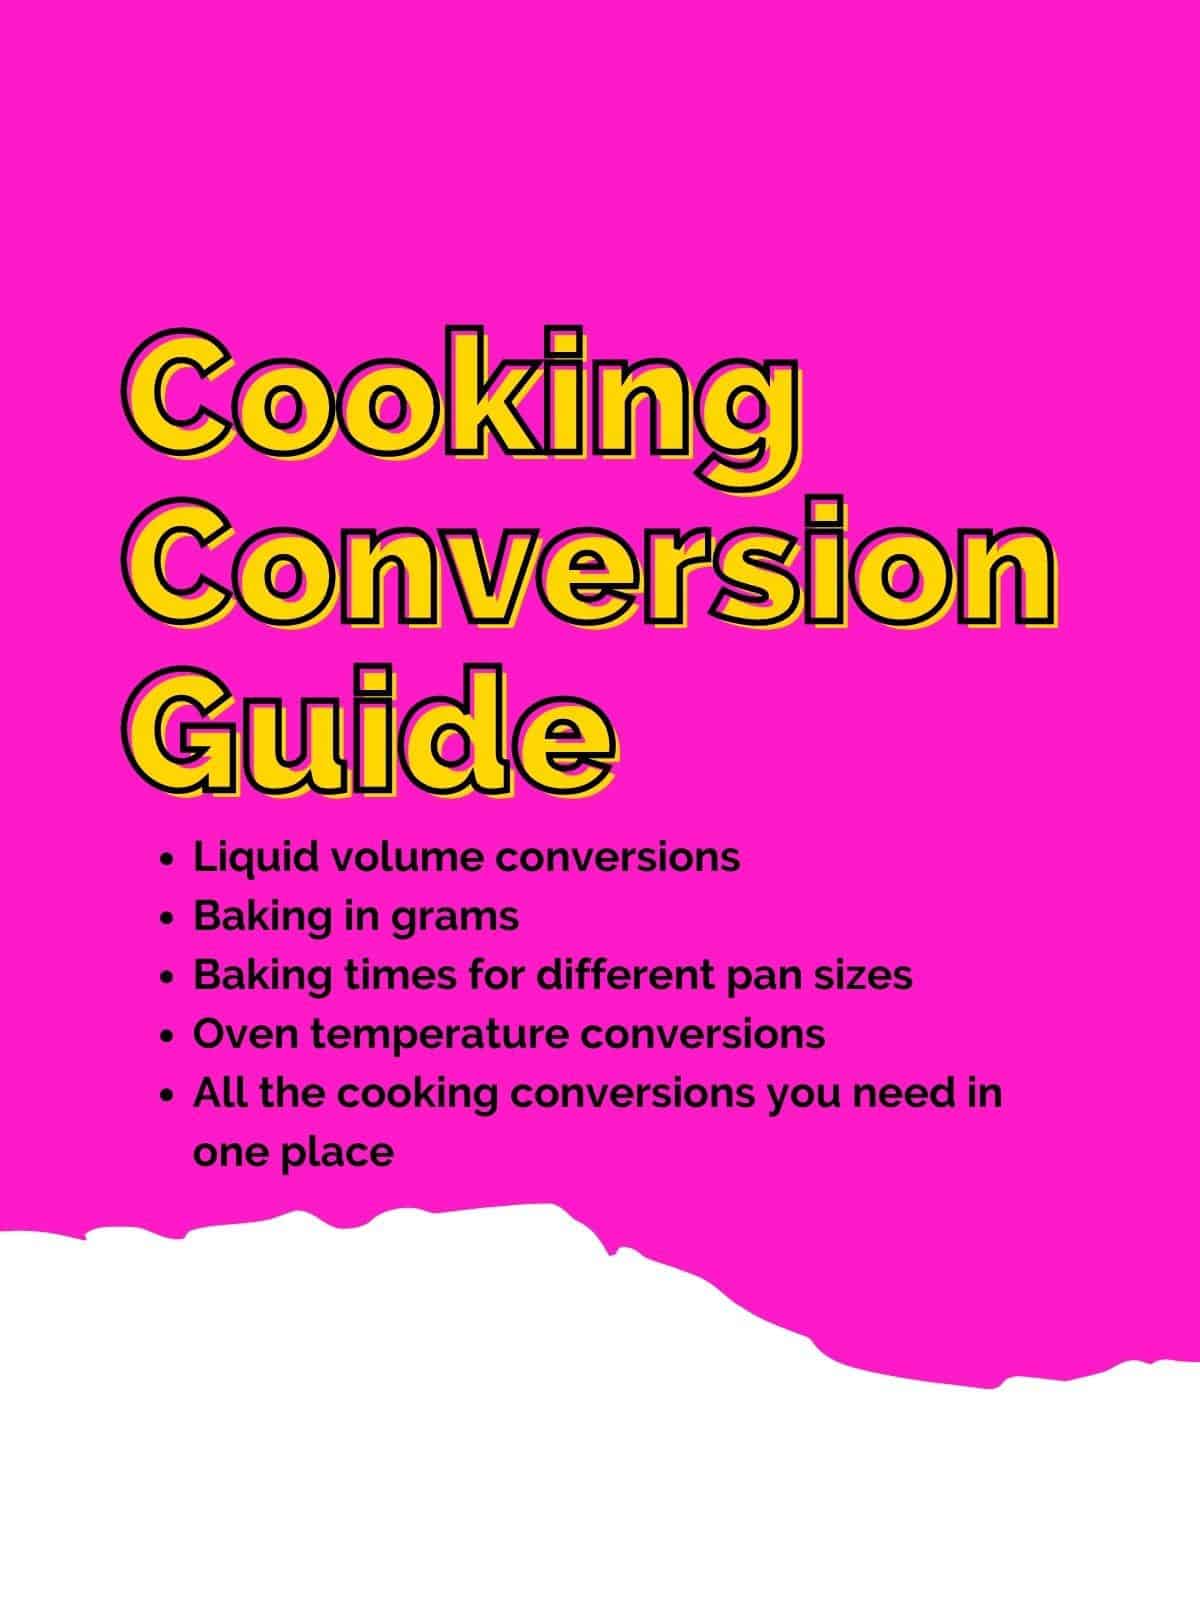 cooking conversion guide for everything you need in the kitchen